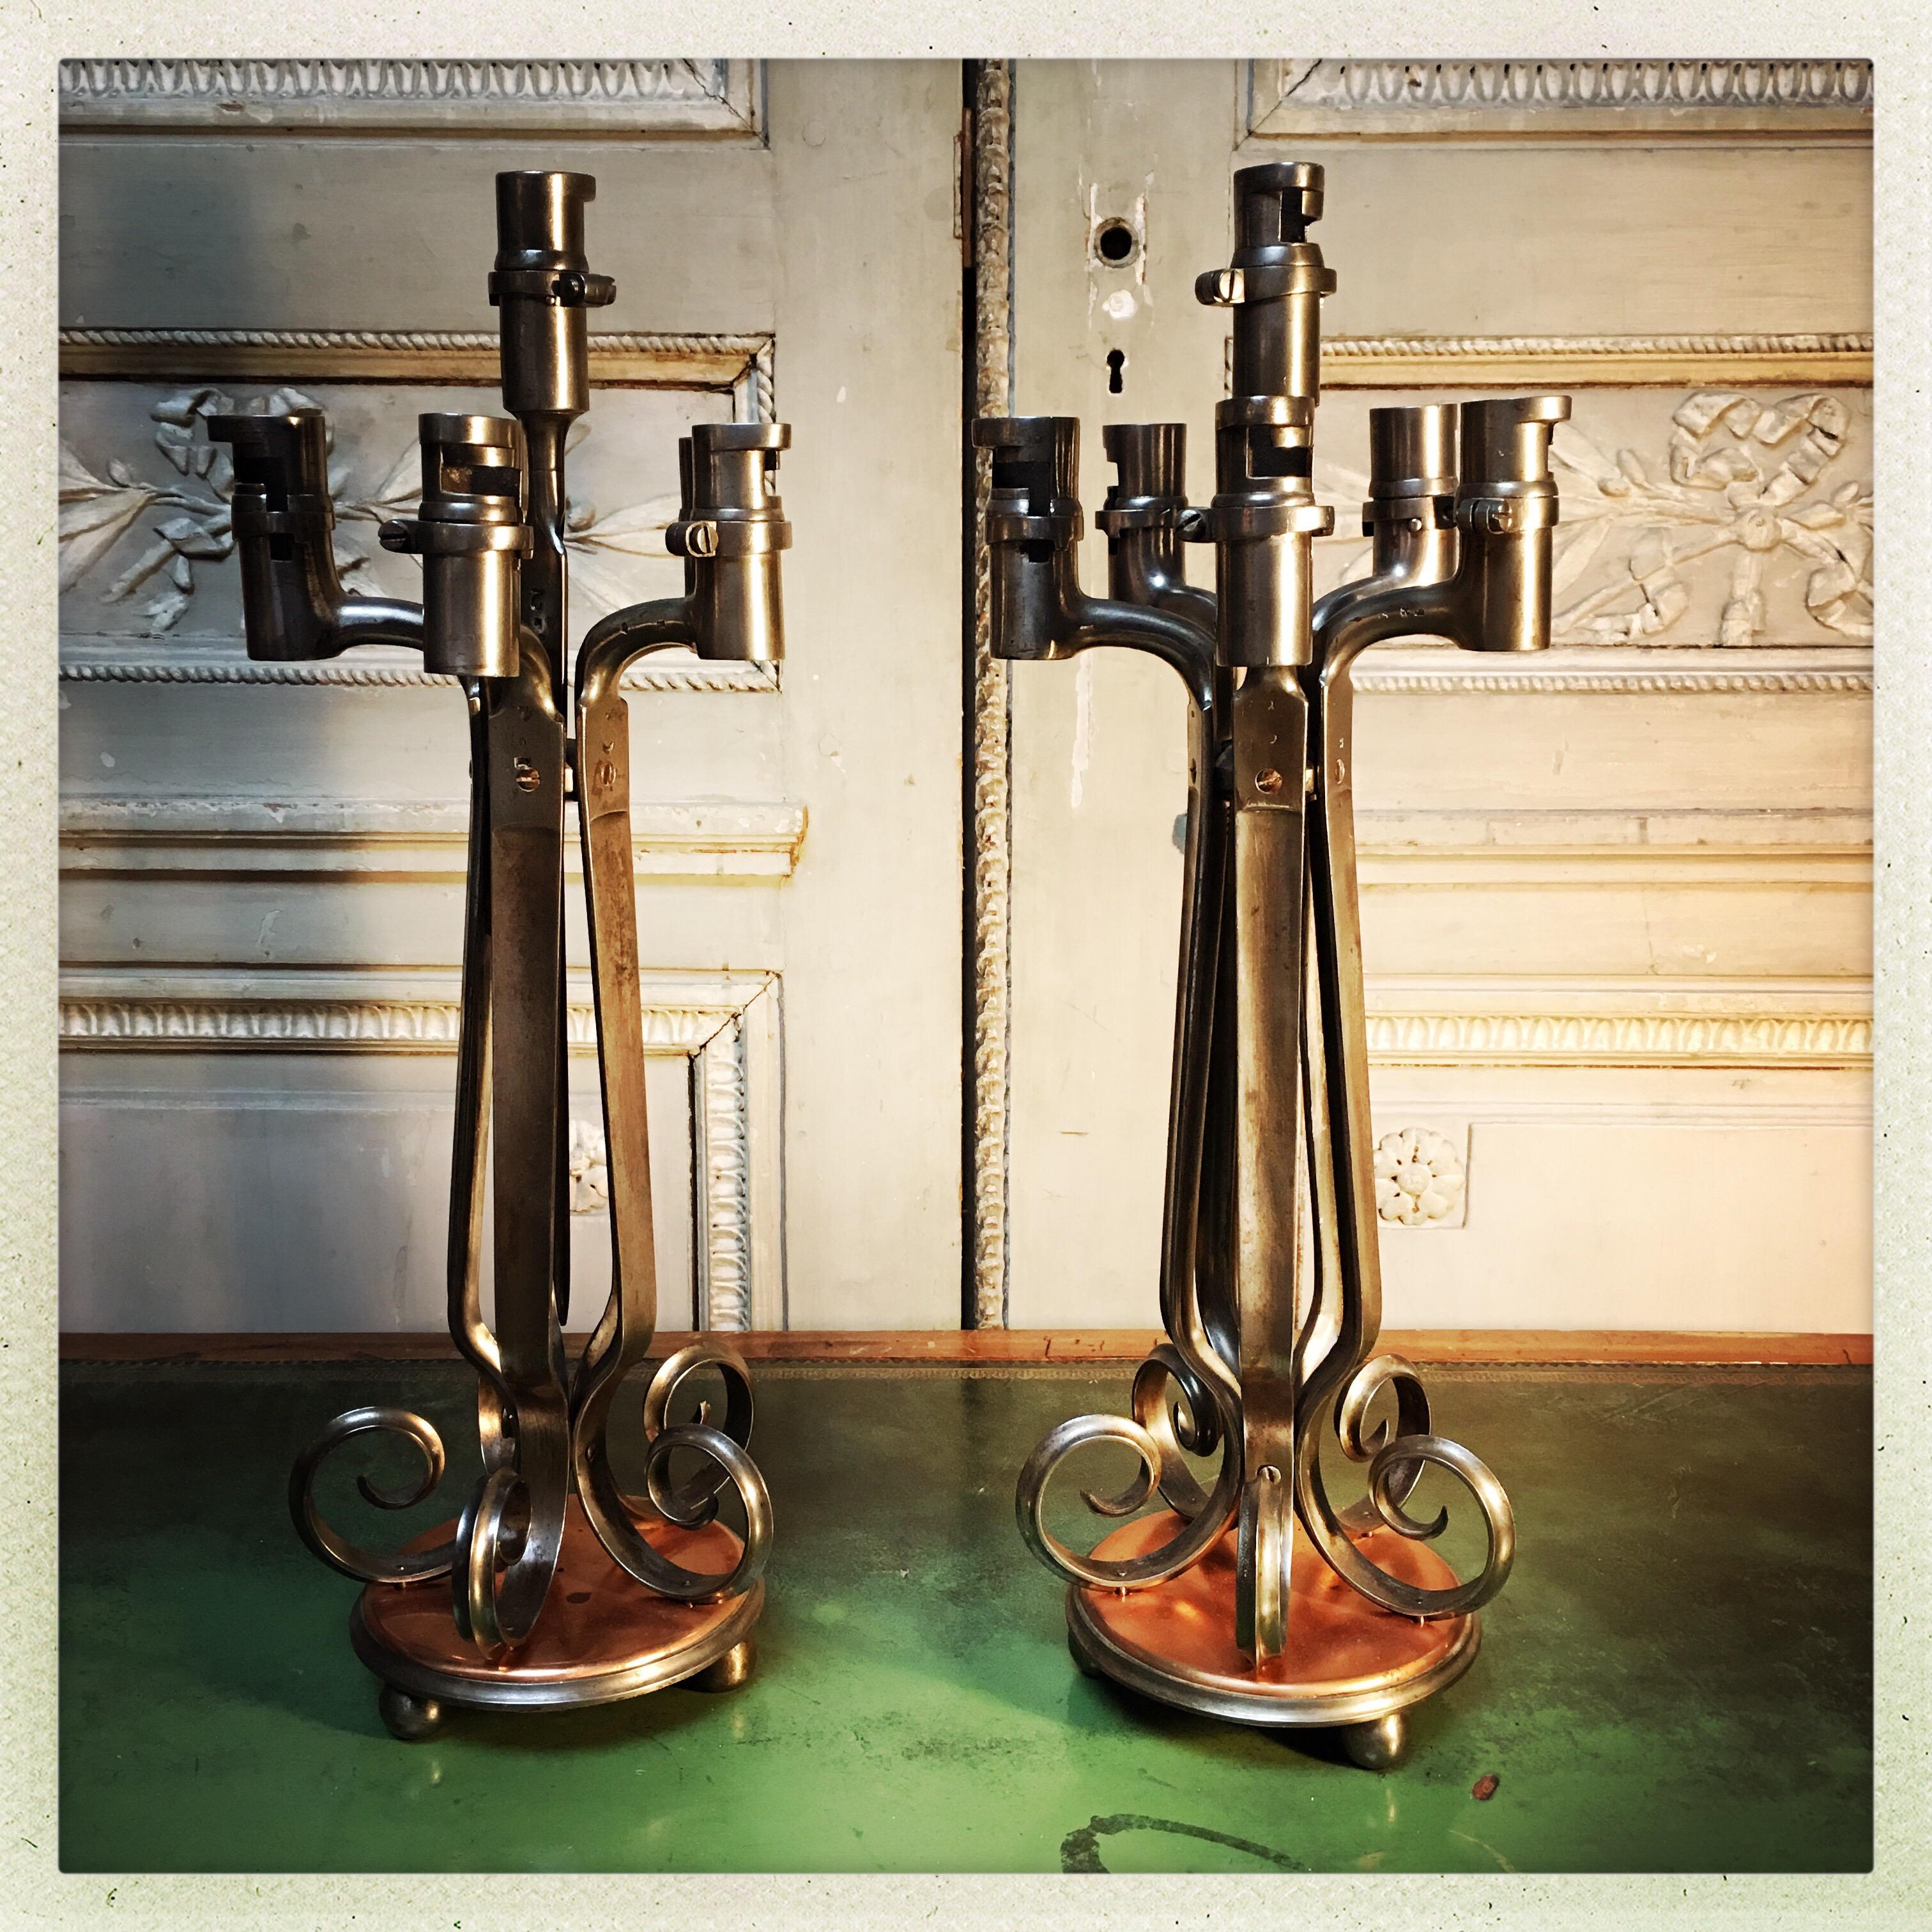 A pair of polished steel and copper candelabra made from old bayonets.